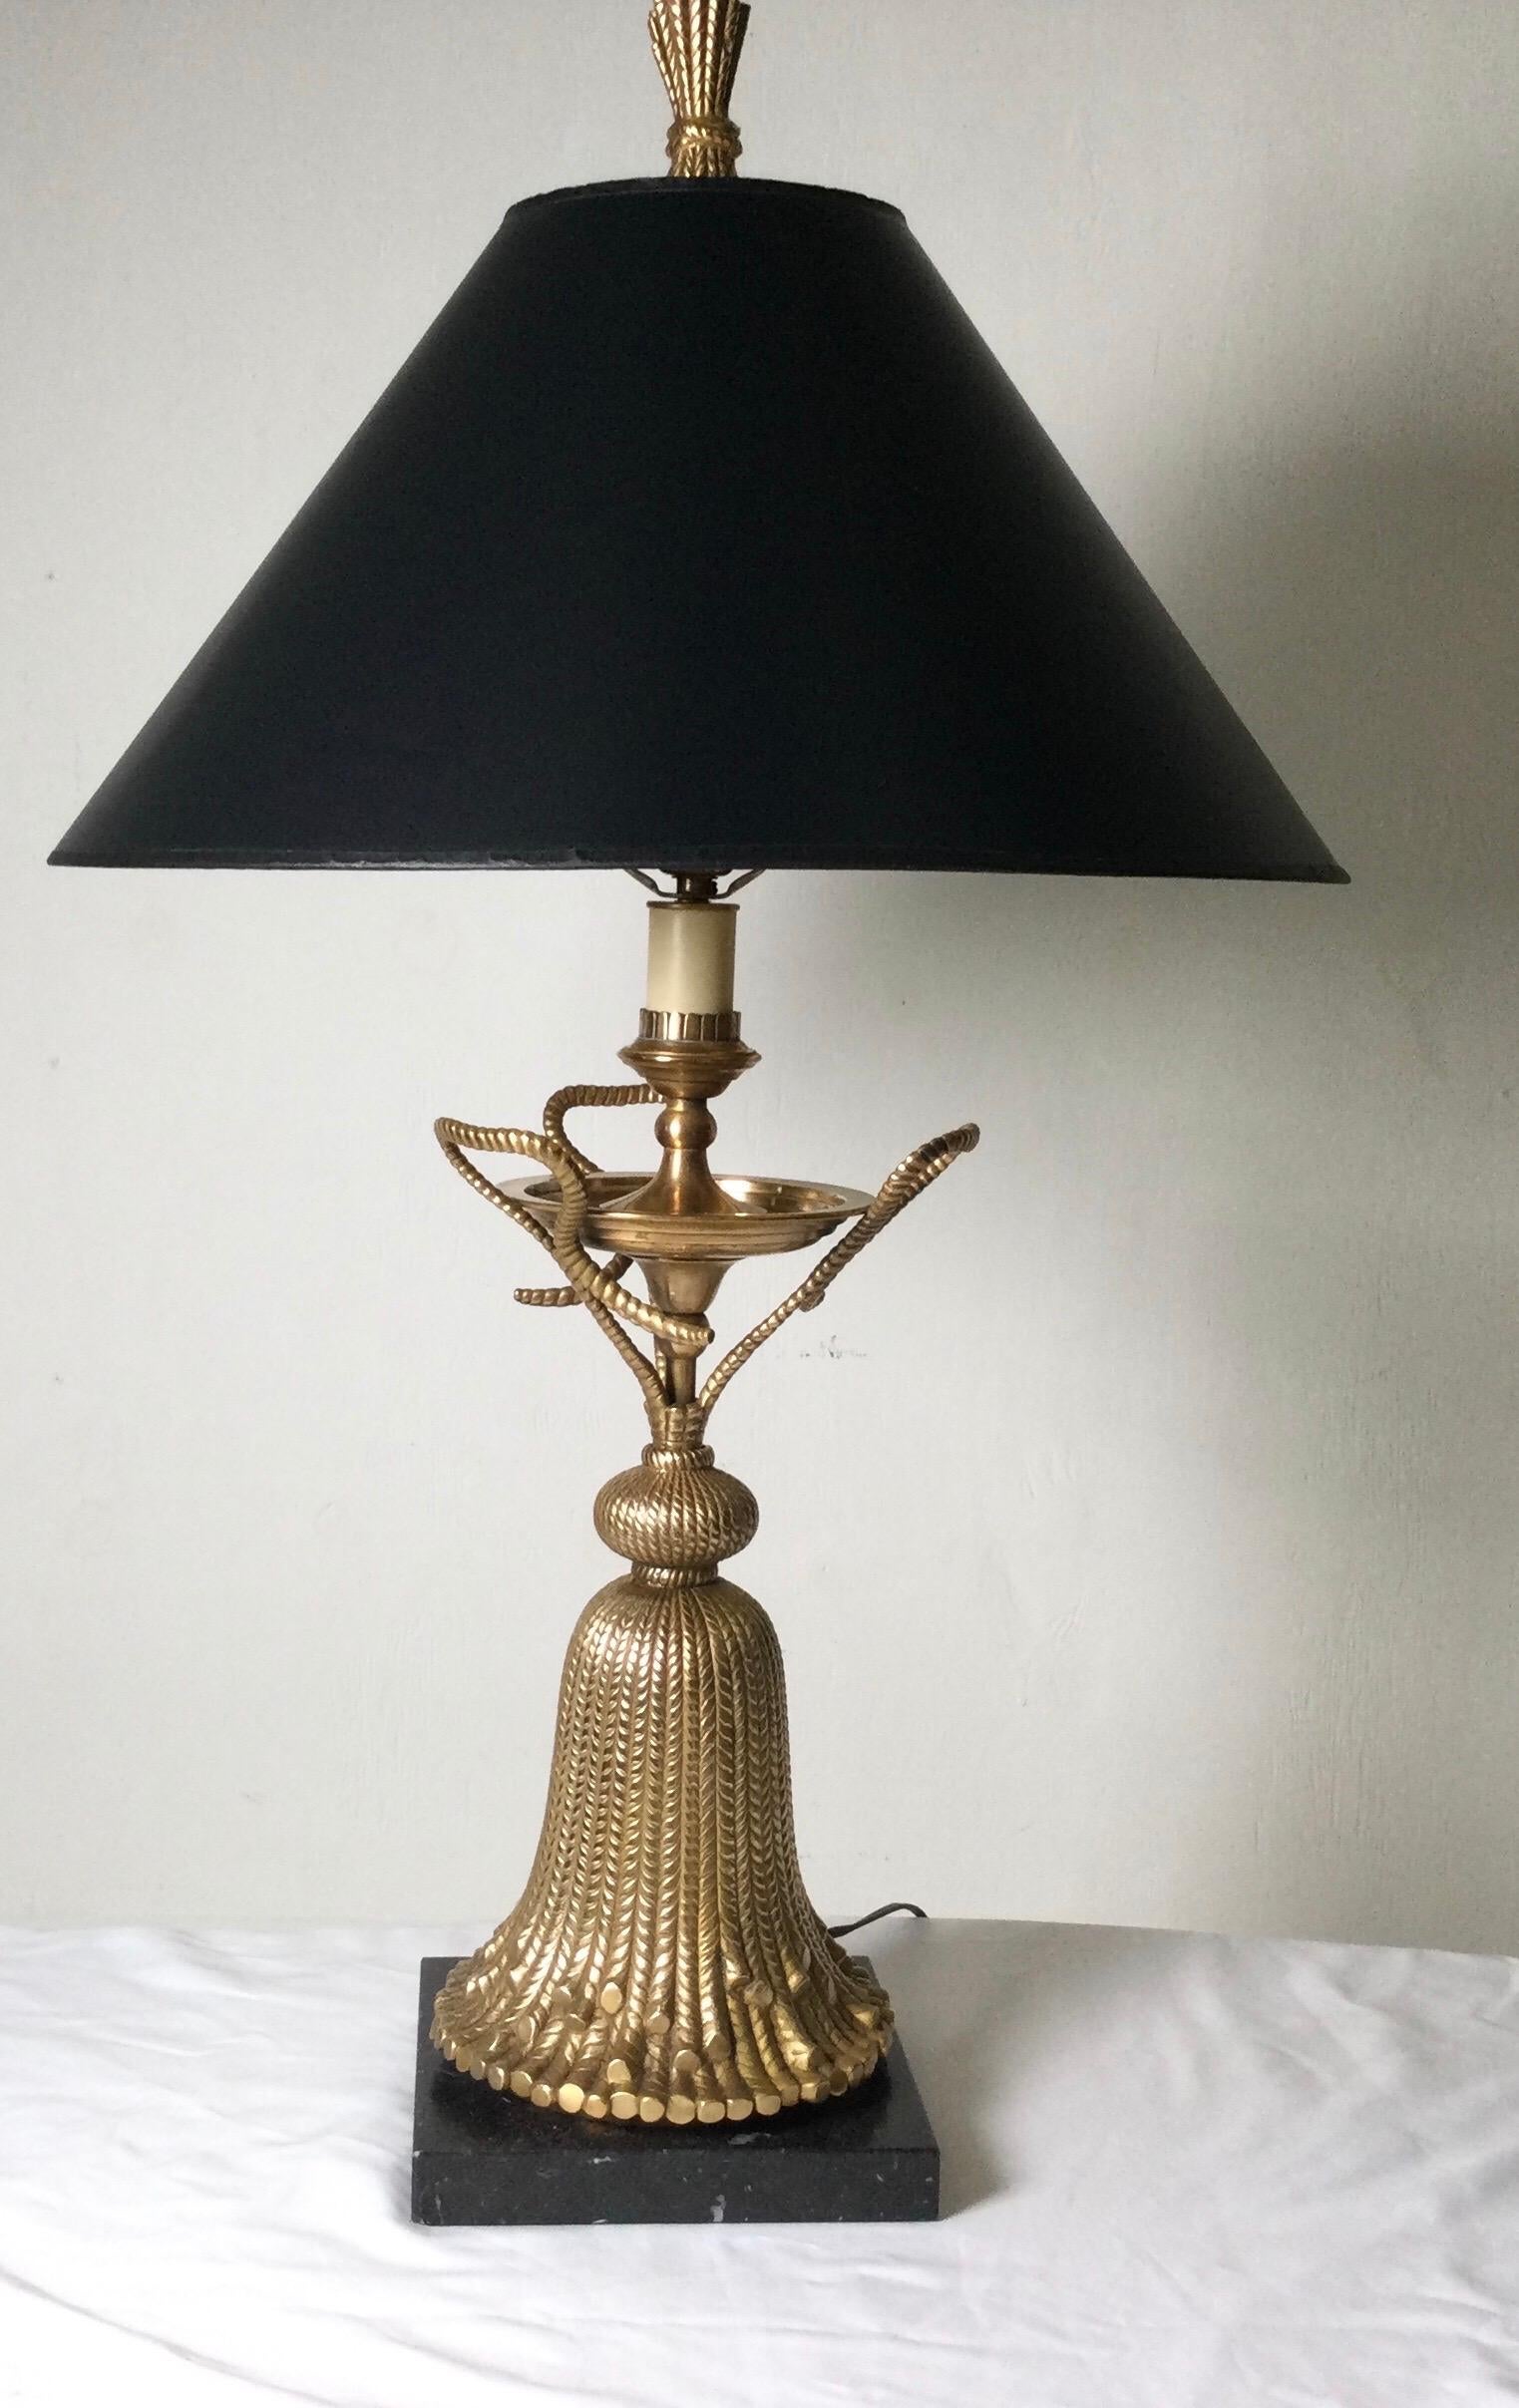 Whimsical cast brass table lamp in an oversized tassel form. The burnished bass finish gives a soft and warm golden brass color. The shade is for Photographic purposes only and not included with the lamp. The shade is for photographic purposes only